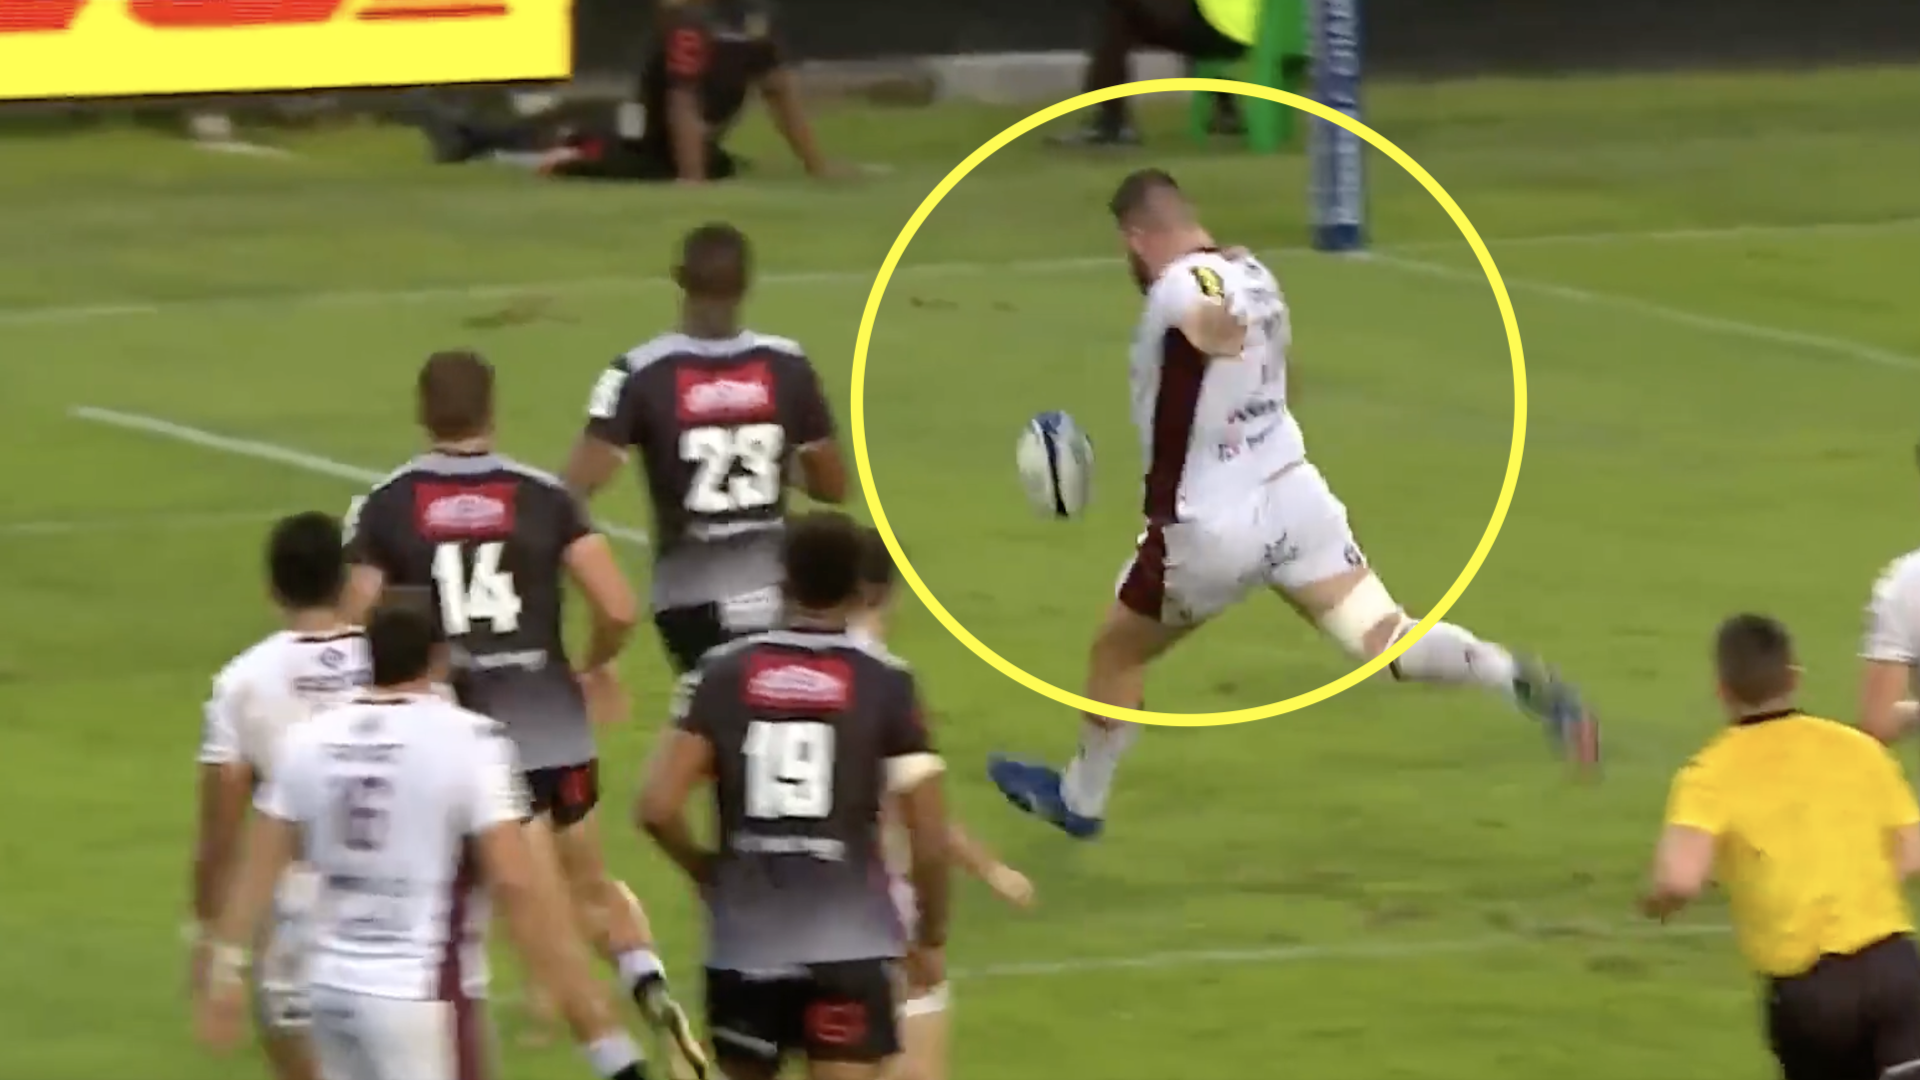 125kg loosehead accidentally launches ball into outer space